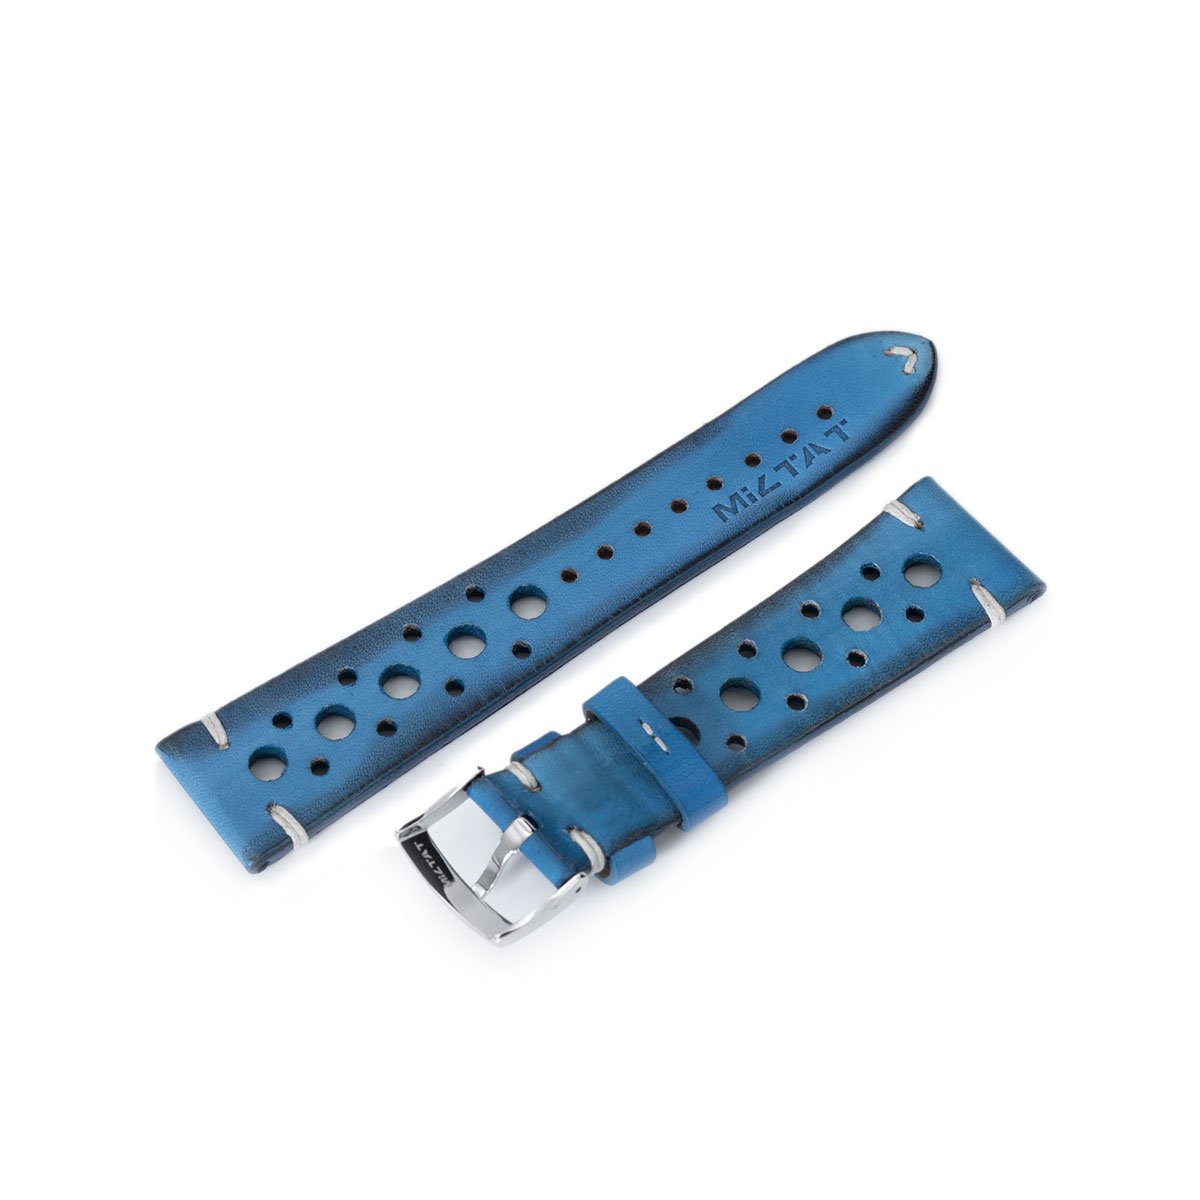 20mm or 22mm MiLTAT Italian Handmade Racer Vintage Blue Watch Strap White Stitching Strapcode Watch Bands